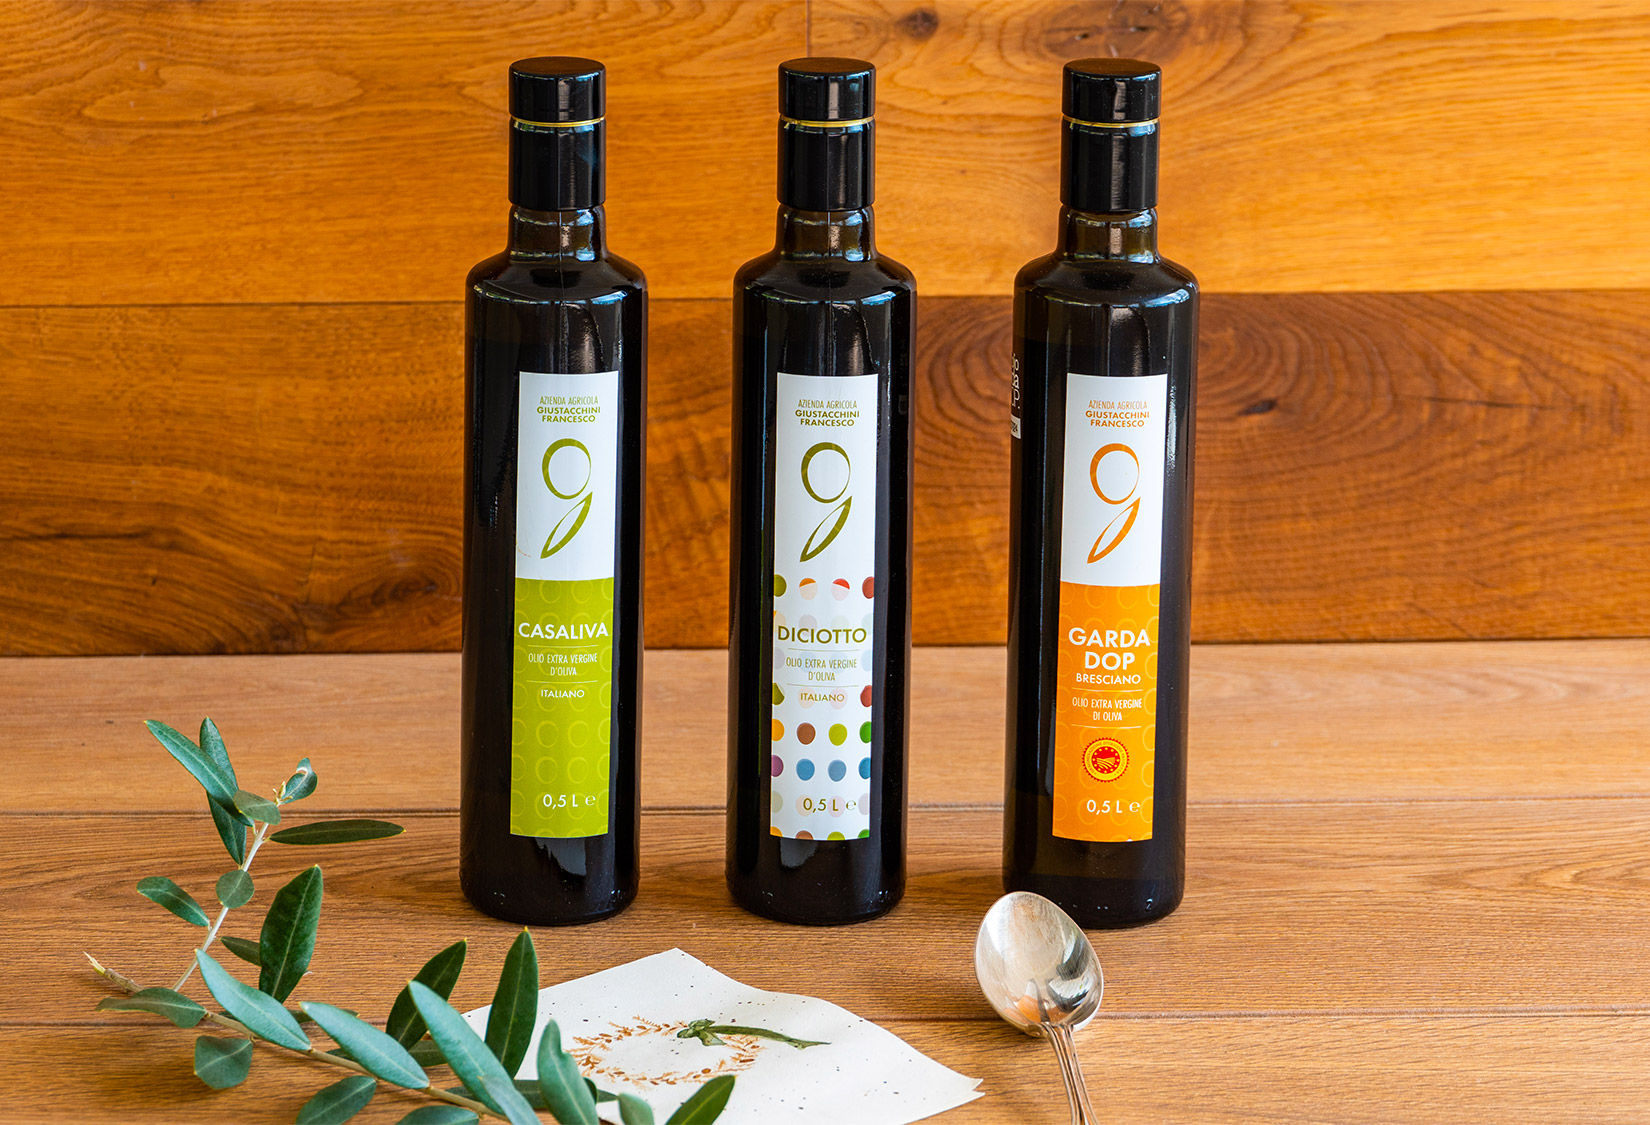 Our olive oil